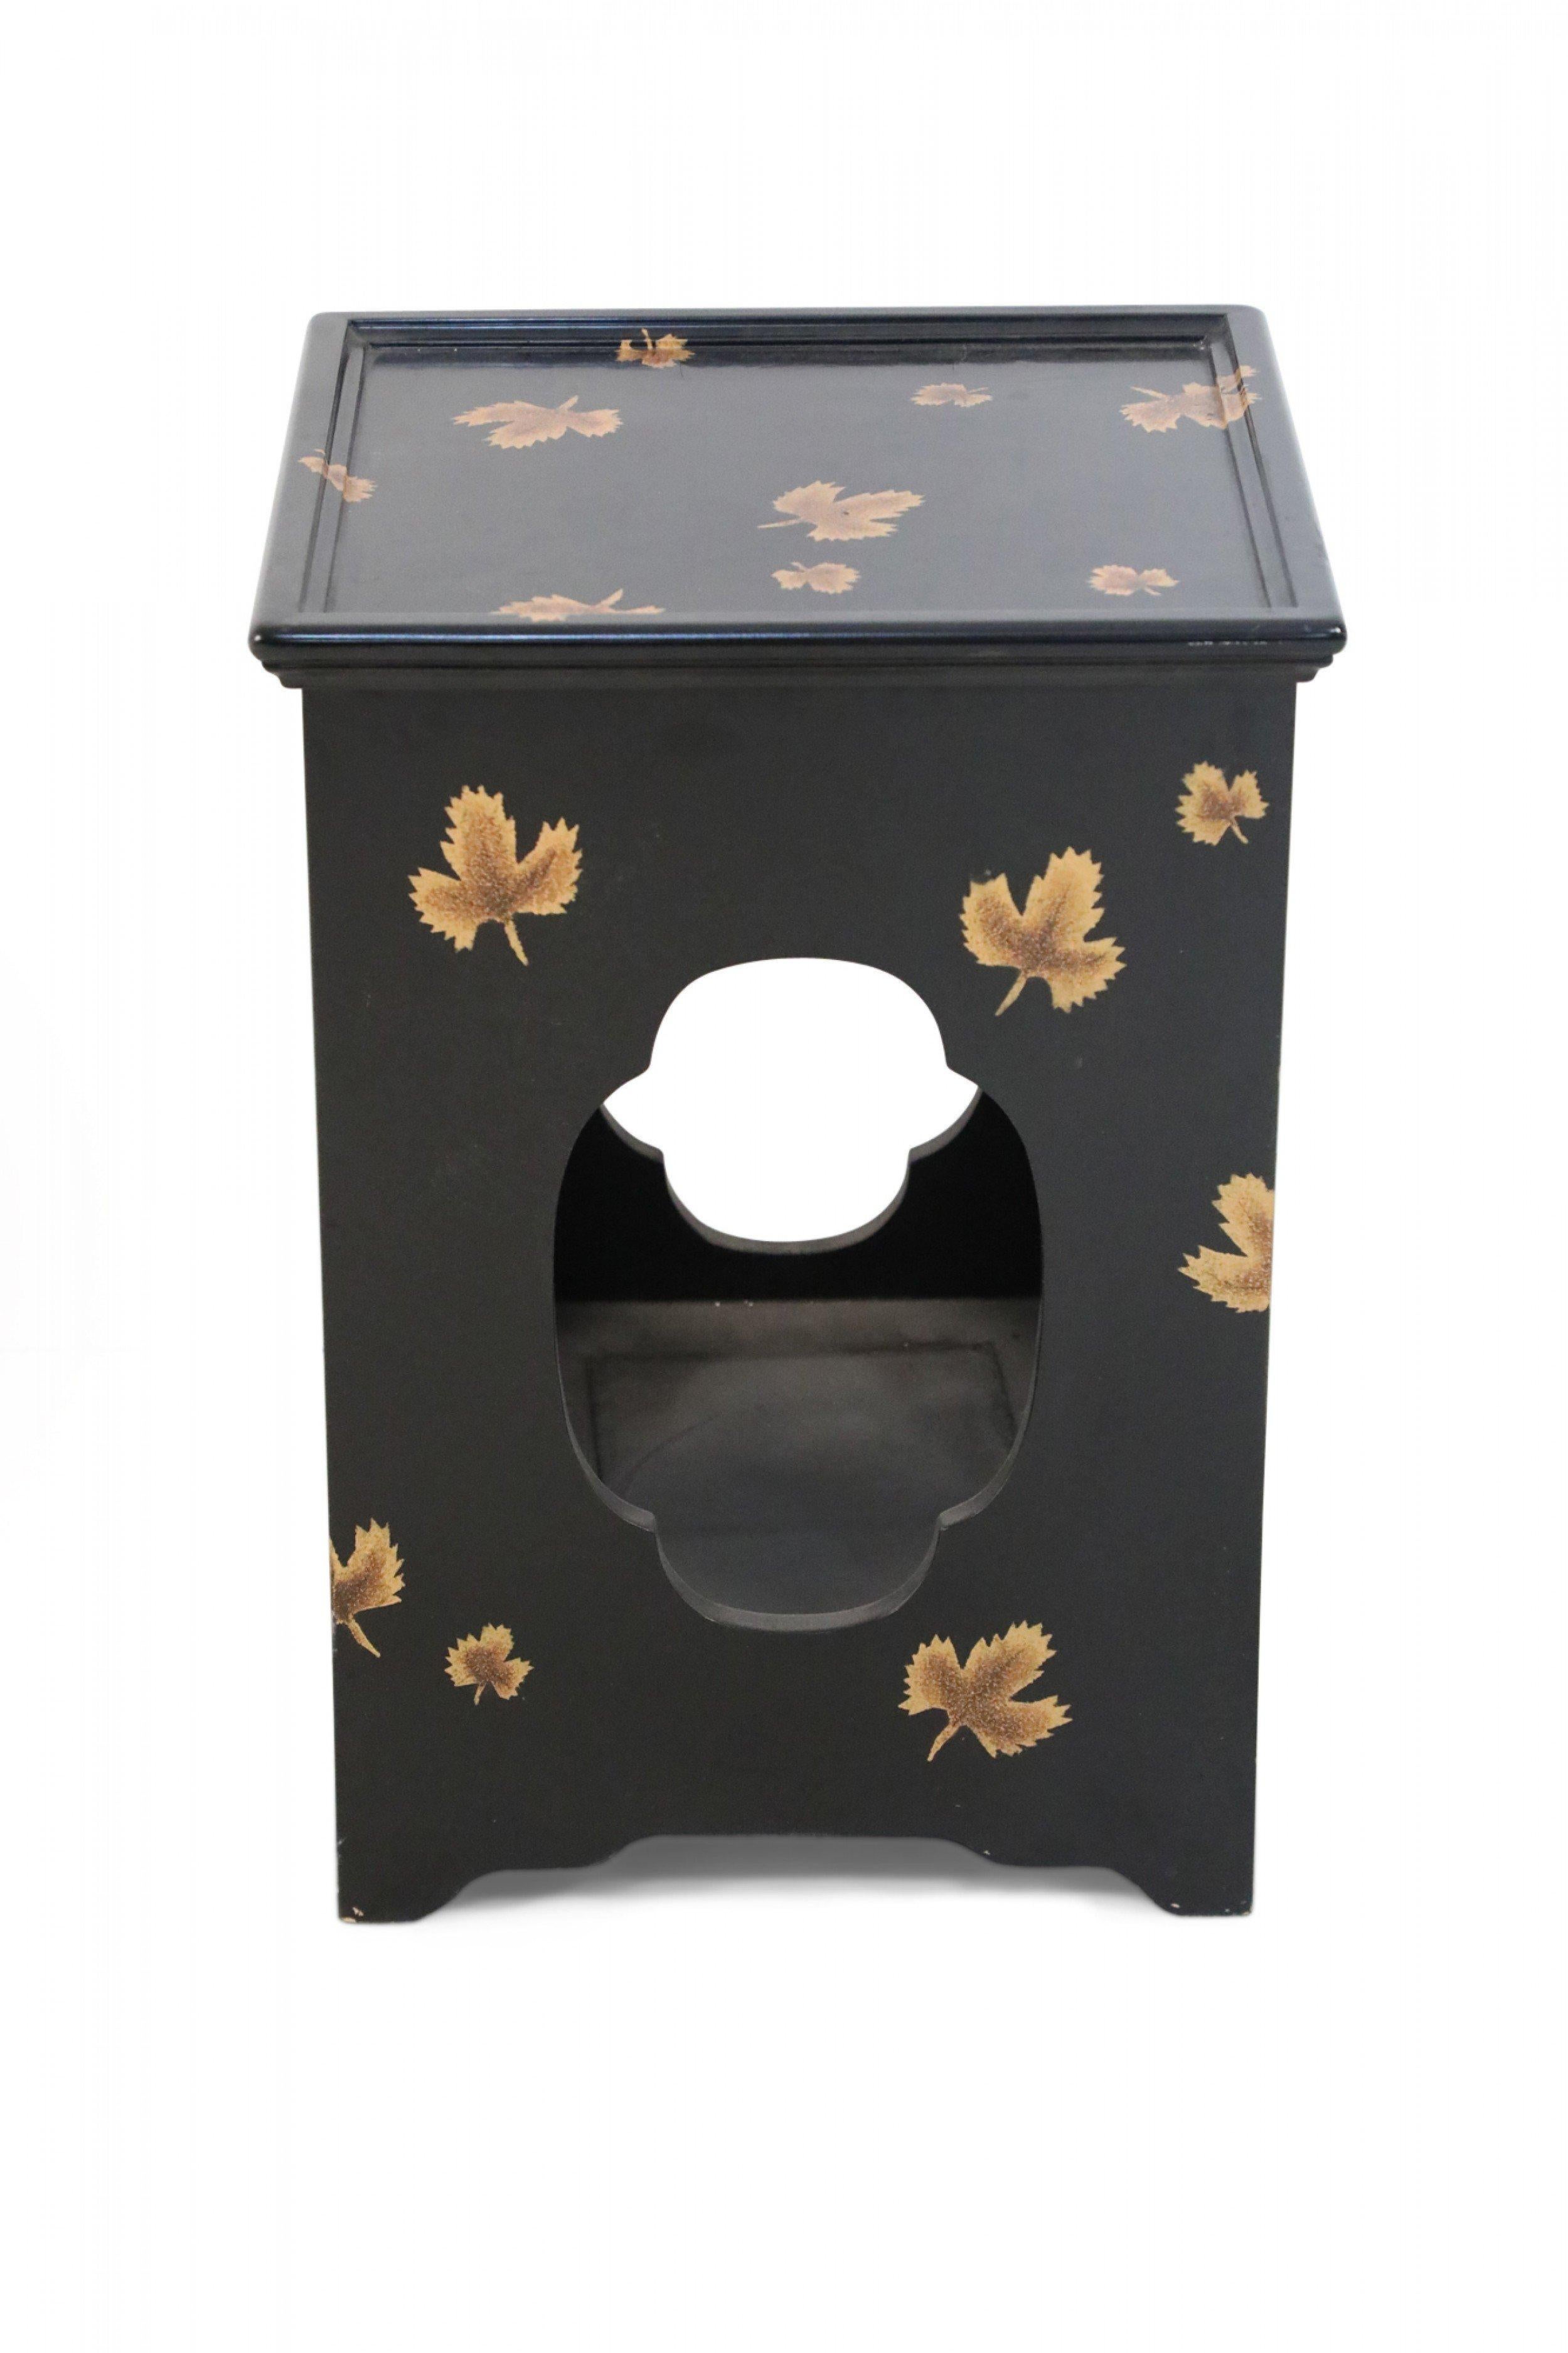 Wood Contemporary Chinese Black and Leaf Motif Square Side Tables For Sale